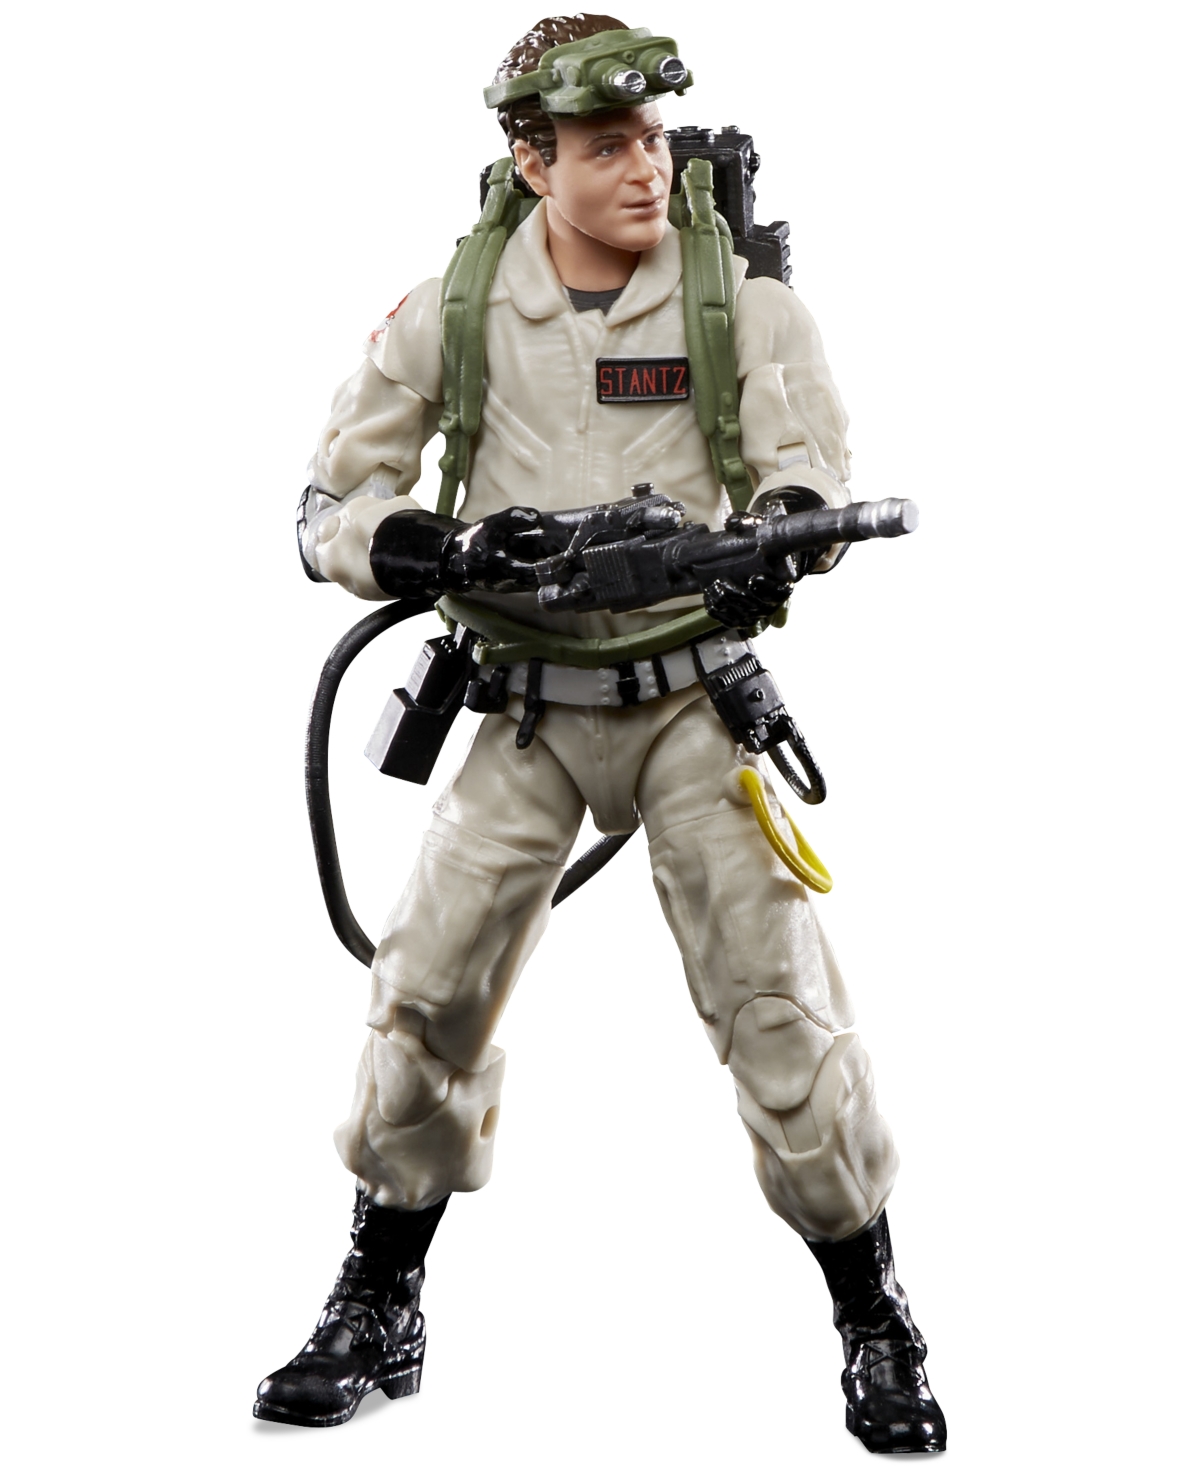 EAN 5010993689026 product image for Closeout! Ghostbuster Plasma Series Stantz Action Figure | upcitemdb.com